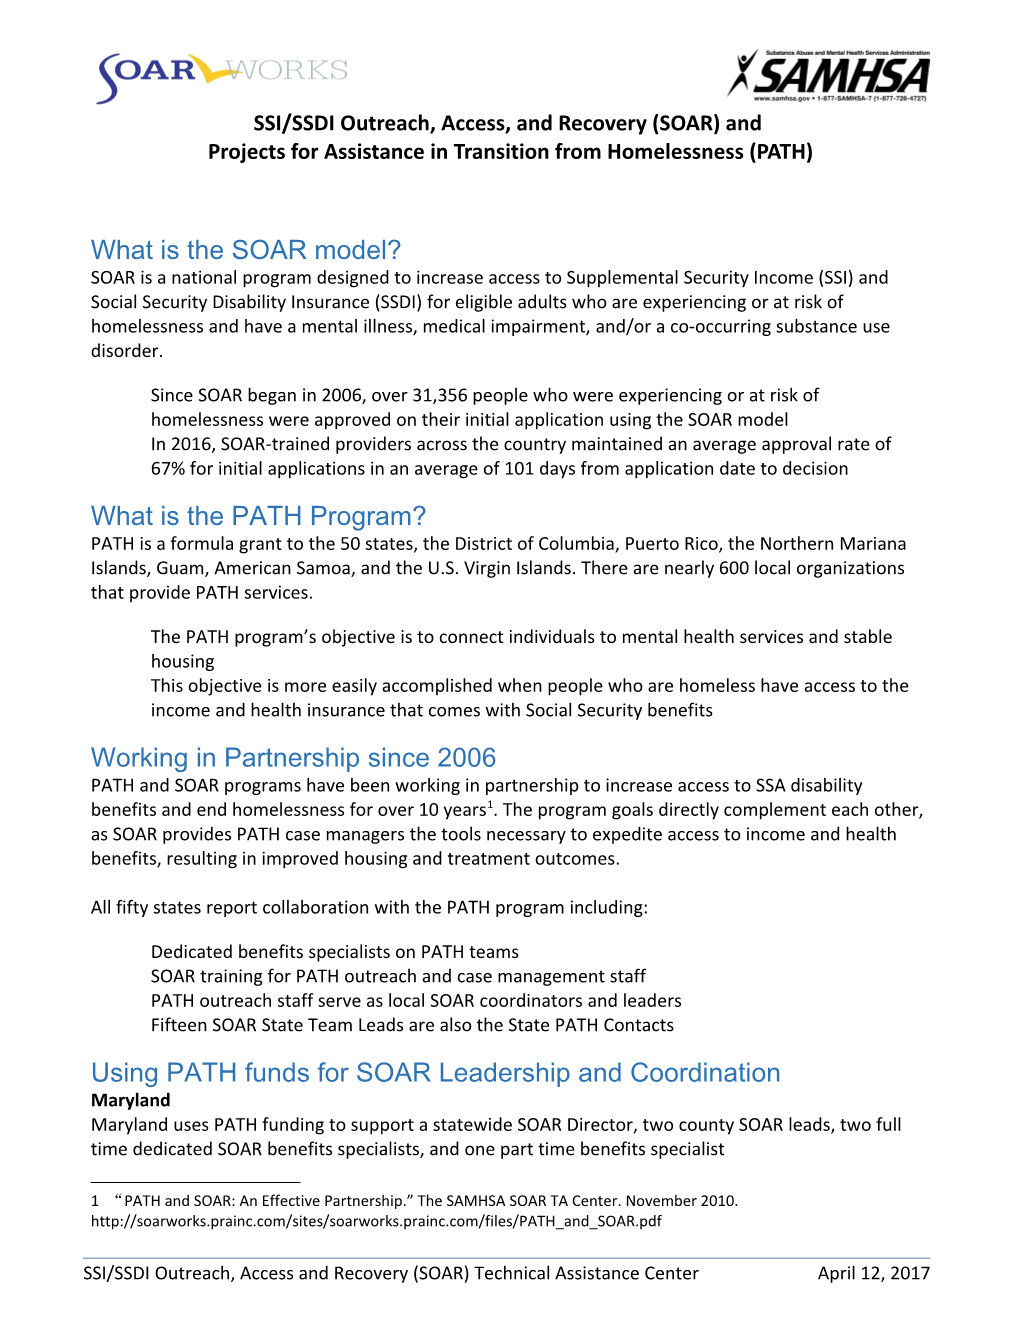 SSI/SSDI Outreach, Access, and Recovery (SOAR) And